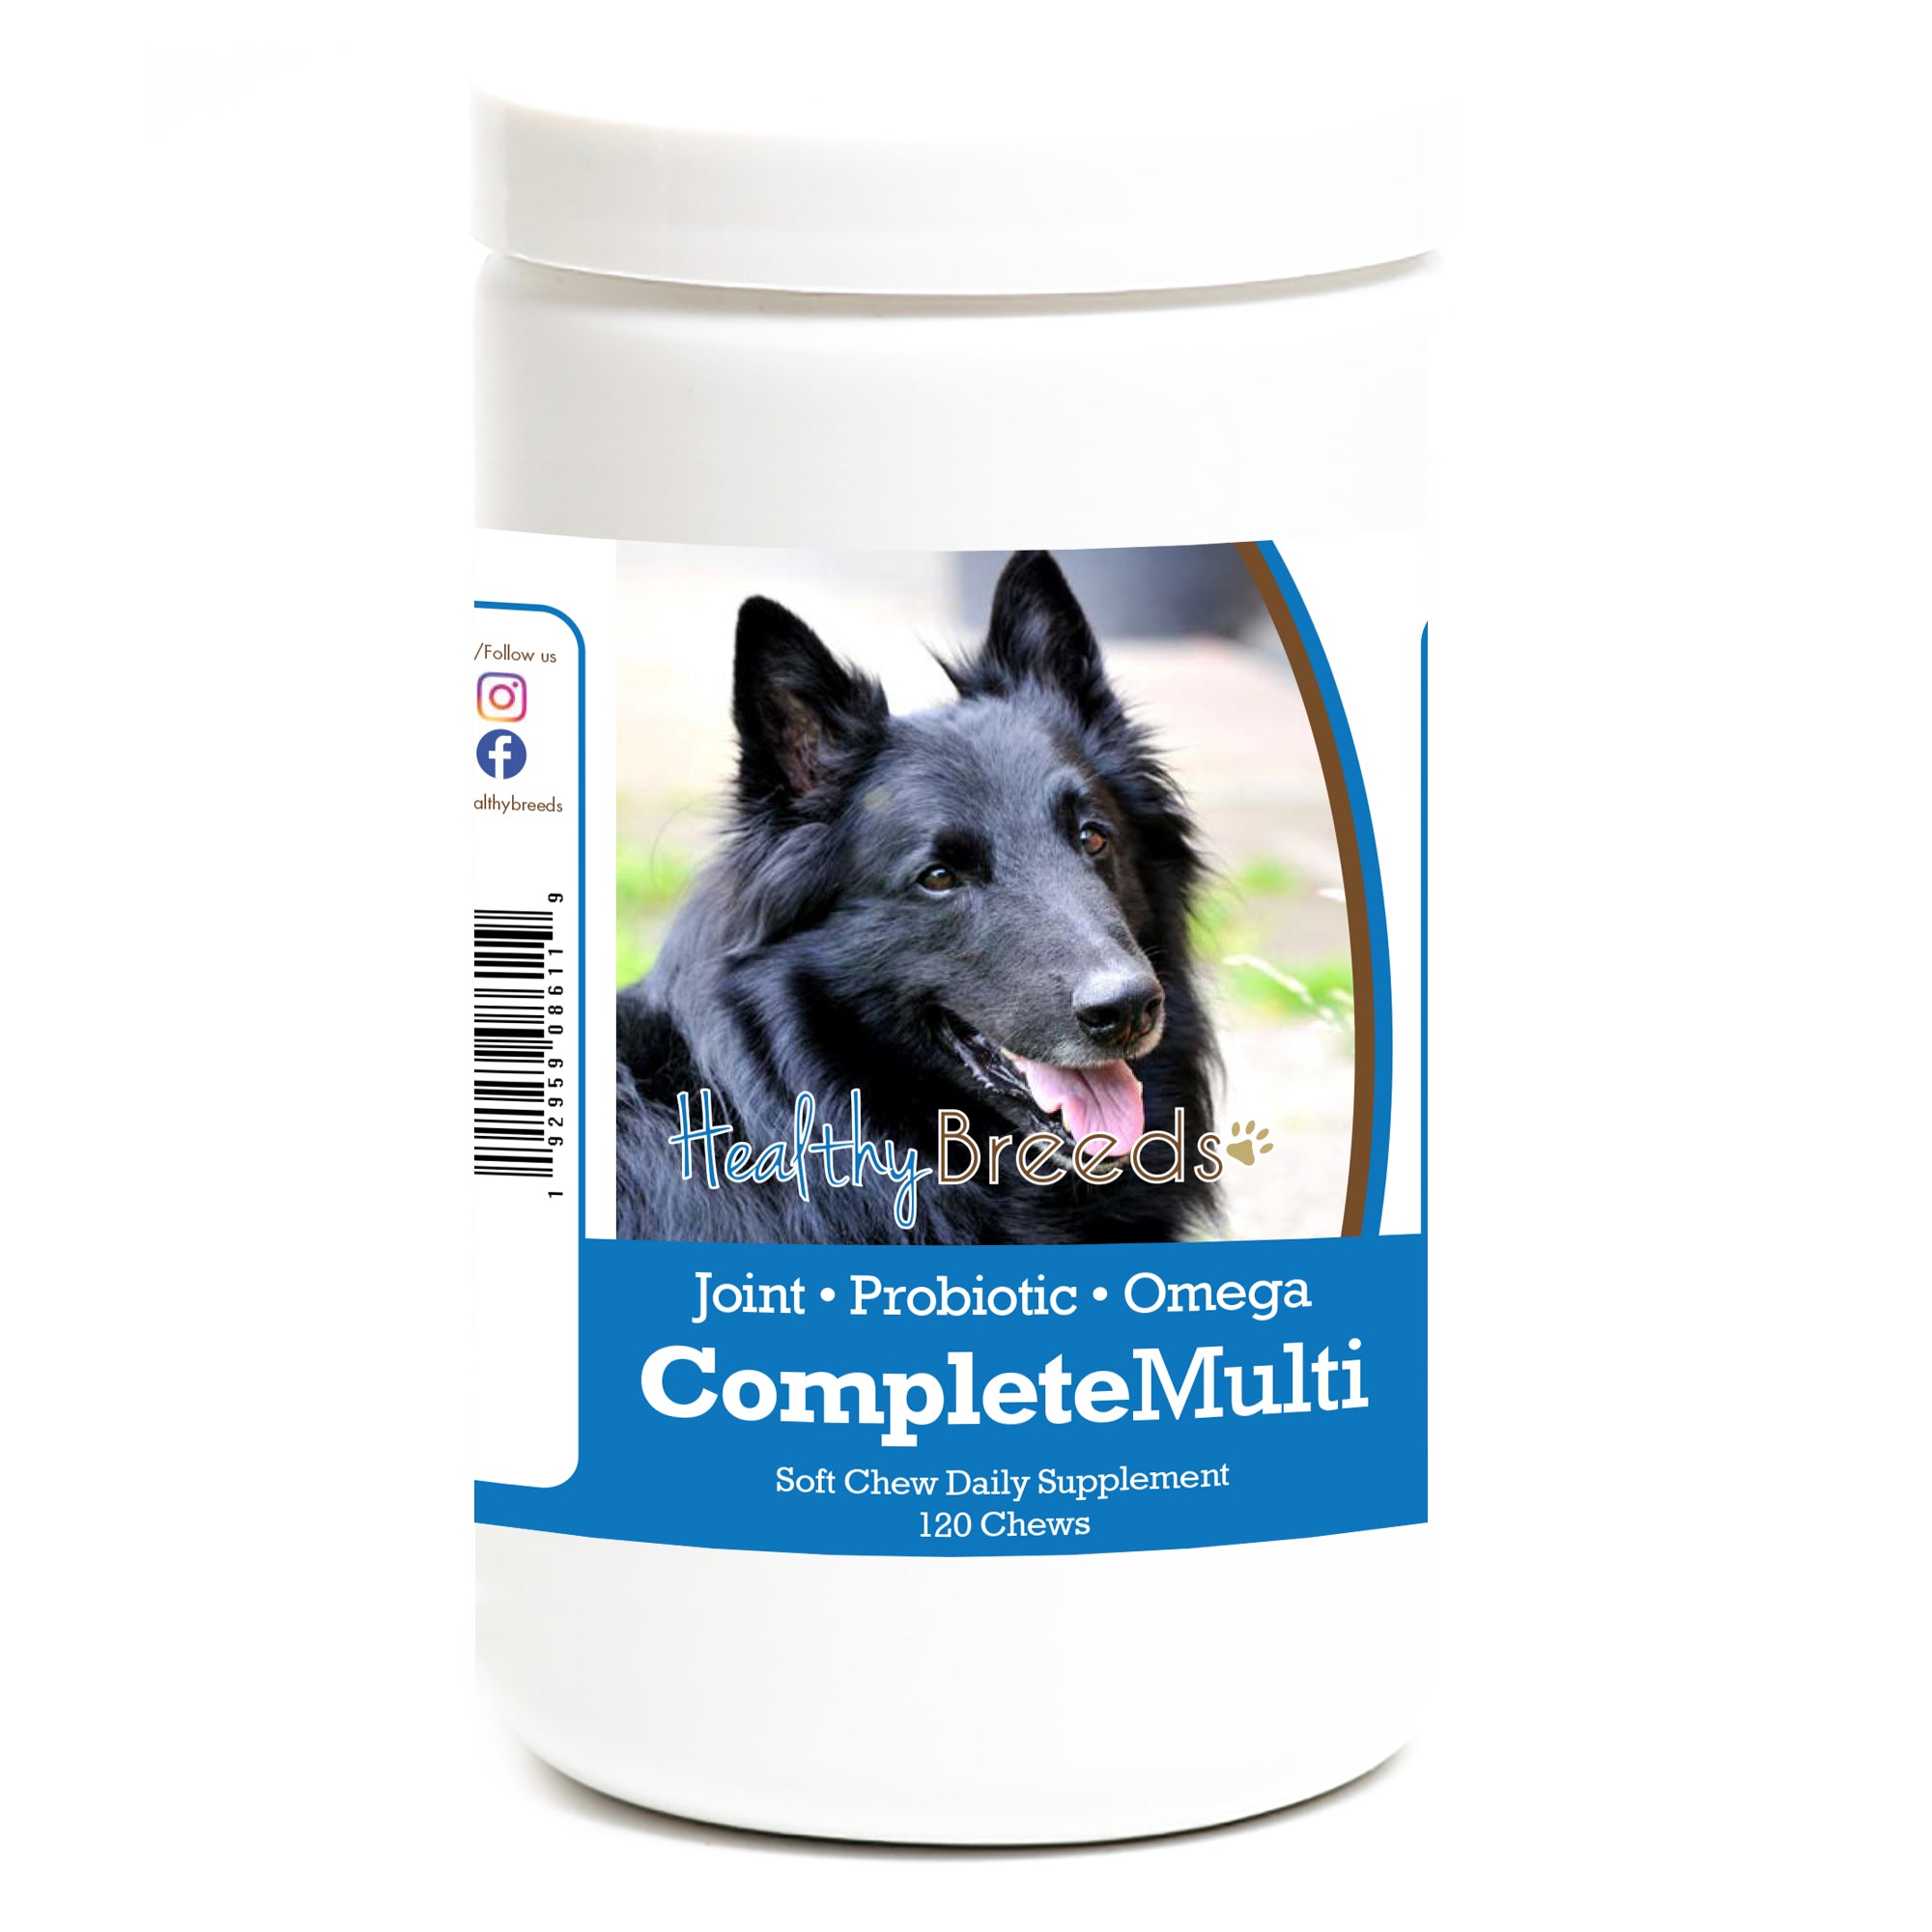 Belgian Sheepdog All In One Multivitamin Soft Chew 120 Count